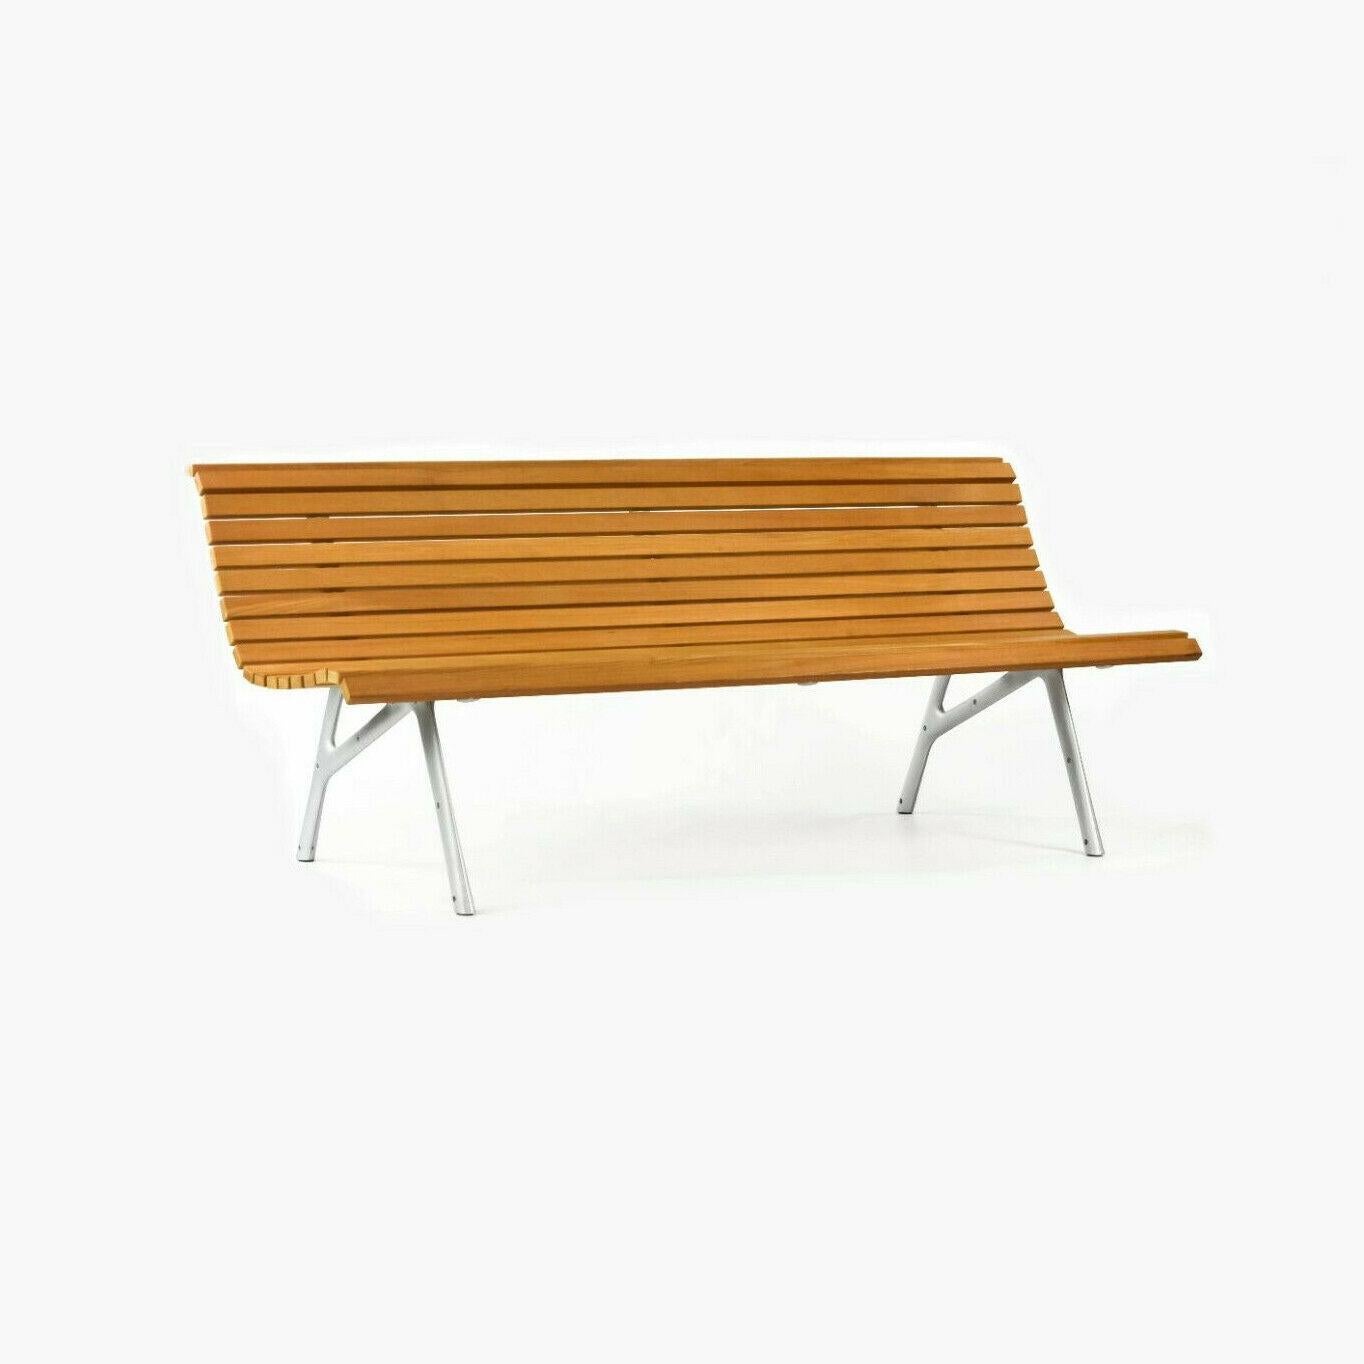 Listed for sale is a single (two are available, but the price listed is for each bench) Teak Setes bench designed by Alberto Meda and produced by Alias. It is a gorgeous example constructed from teak slats and die-cast aluminum. Meda is a masterful